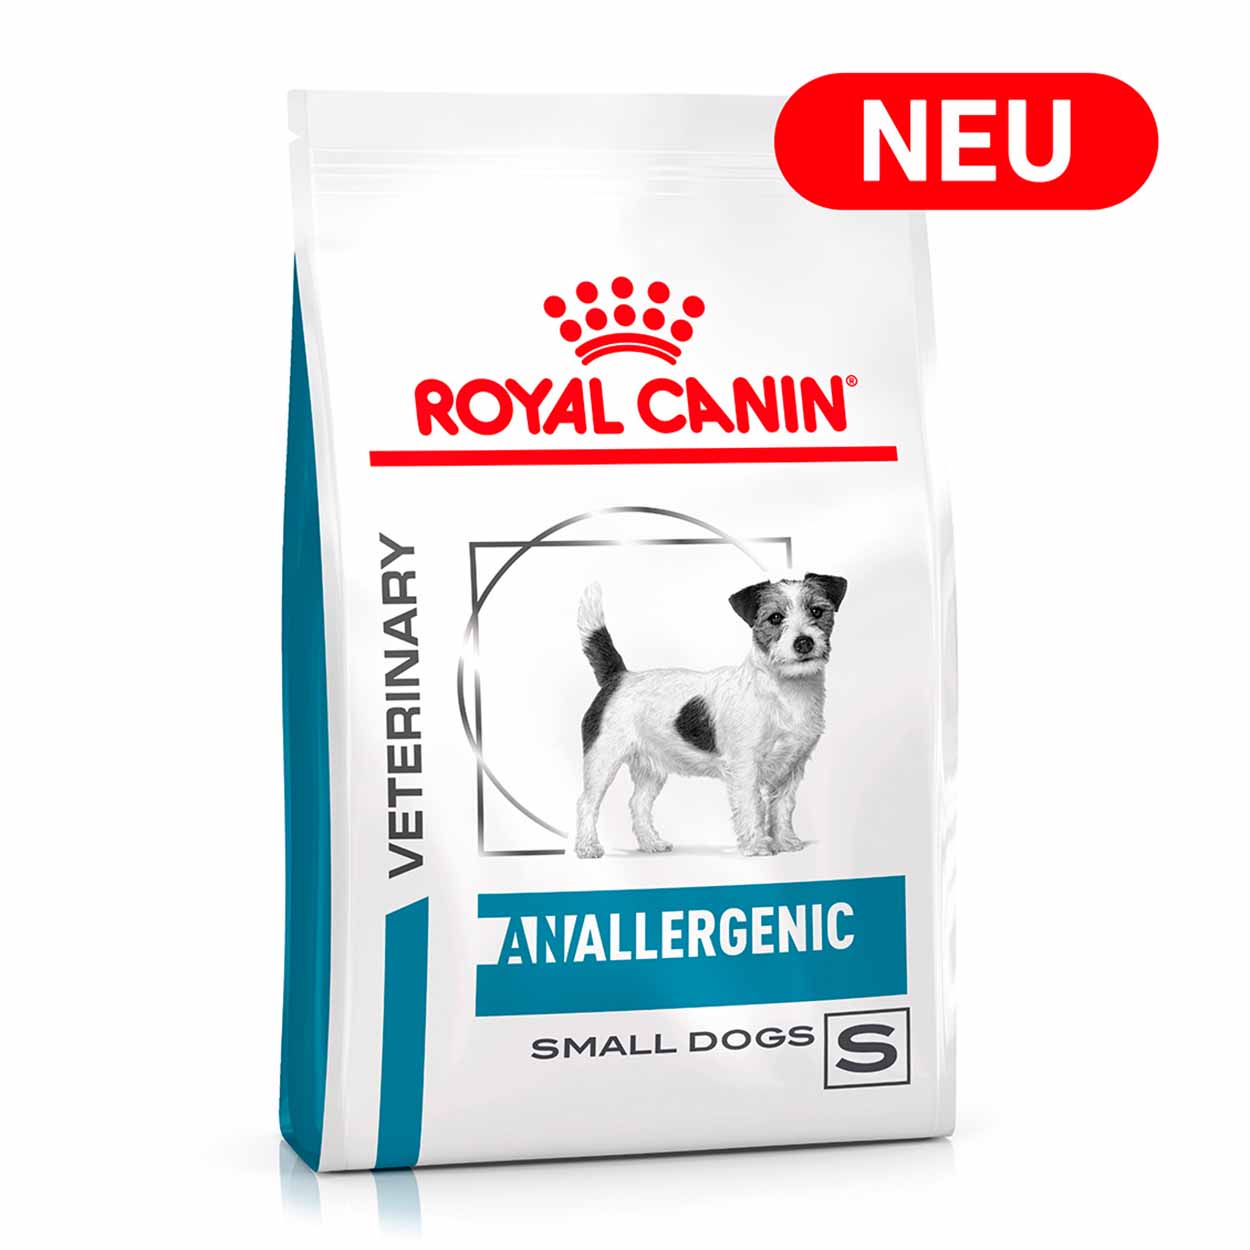 Royal Canin Anallergenic Small Dog 1,5kg